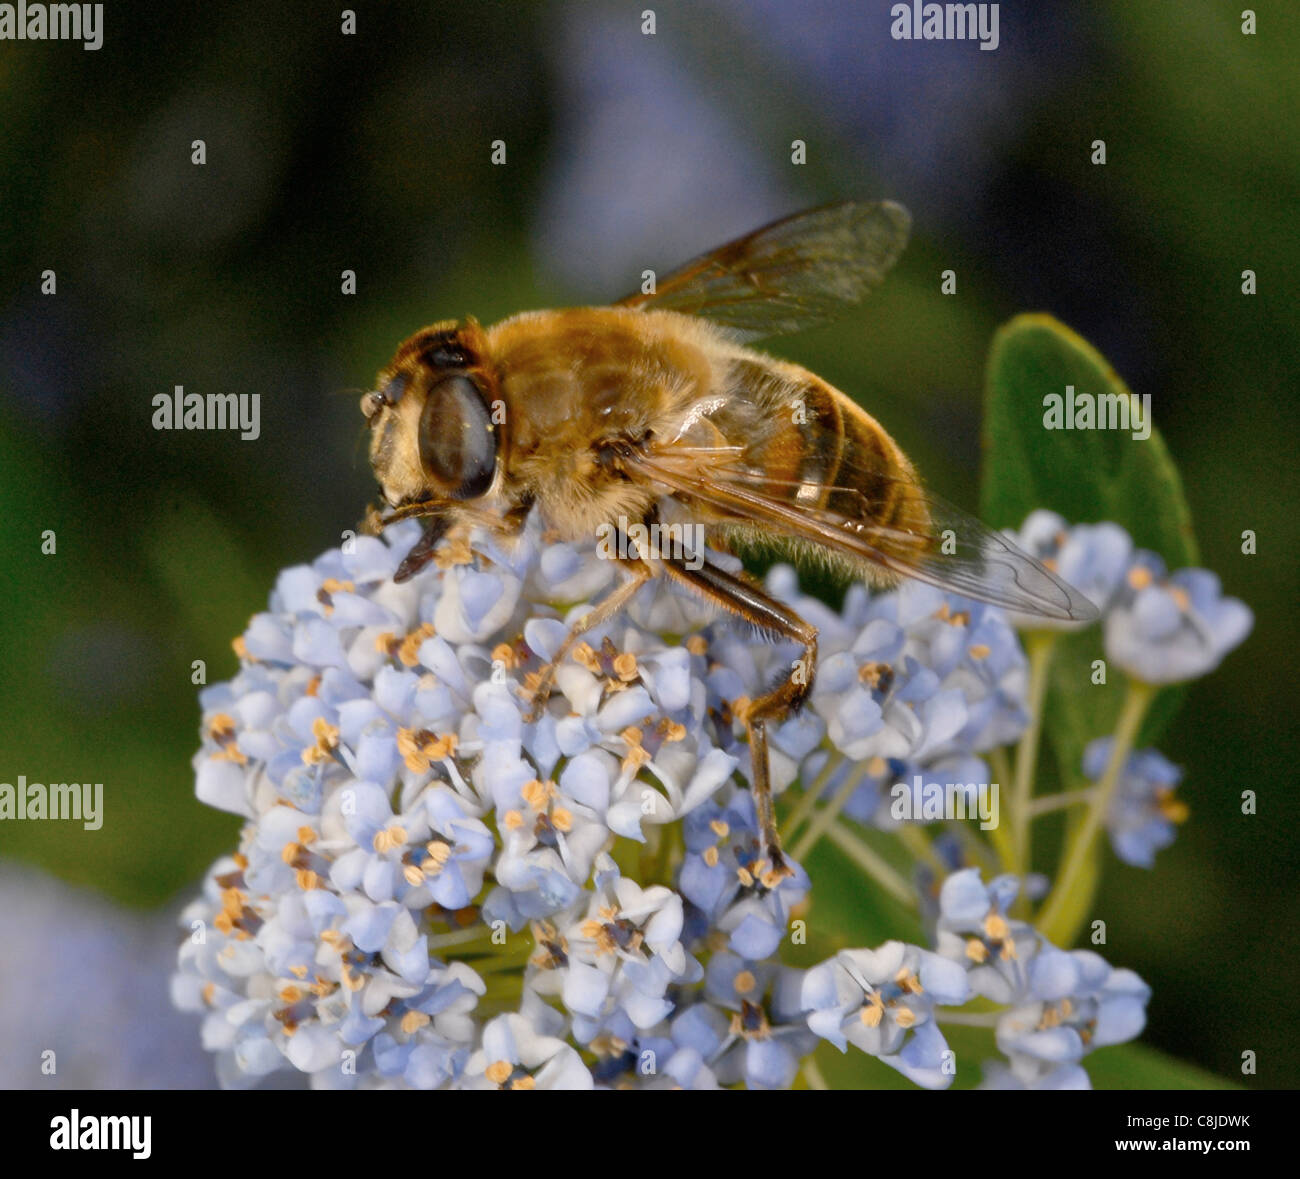 This is a honey bee or honeybee (Apis mellifera or western honey bee) gathering nectar. Stock Photo